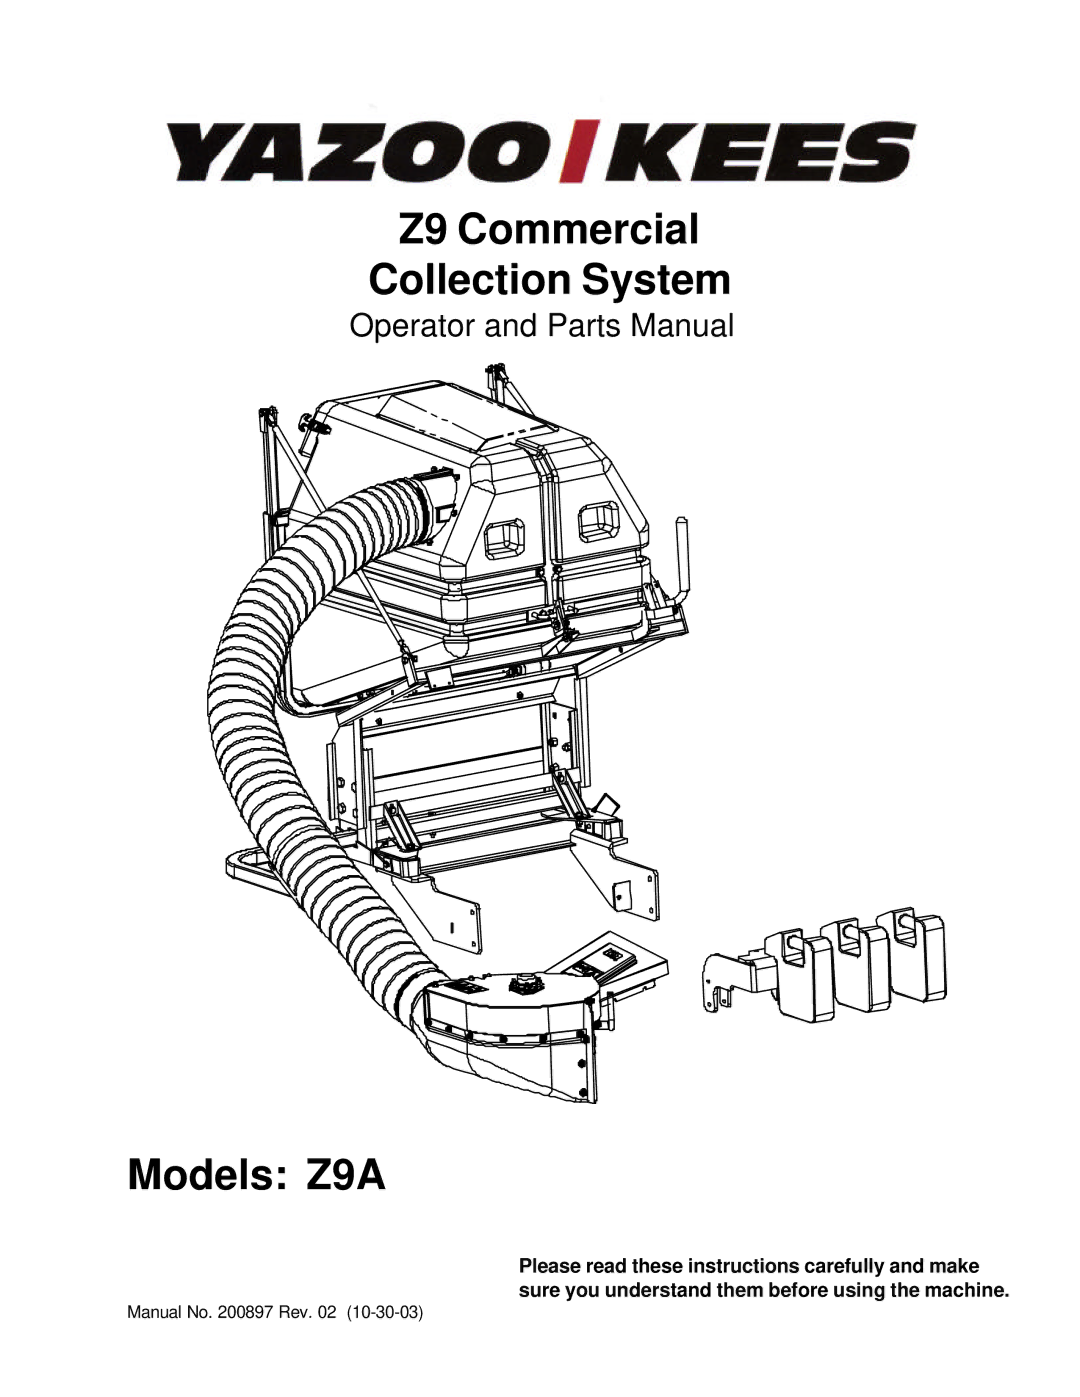 Yazoo/Kees Z9A manual Z9 Commercial Collection System 